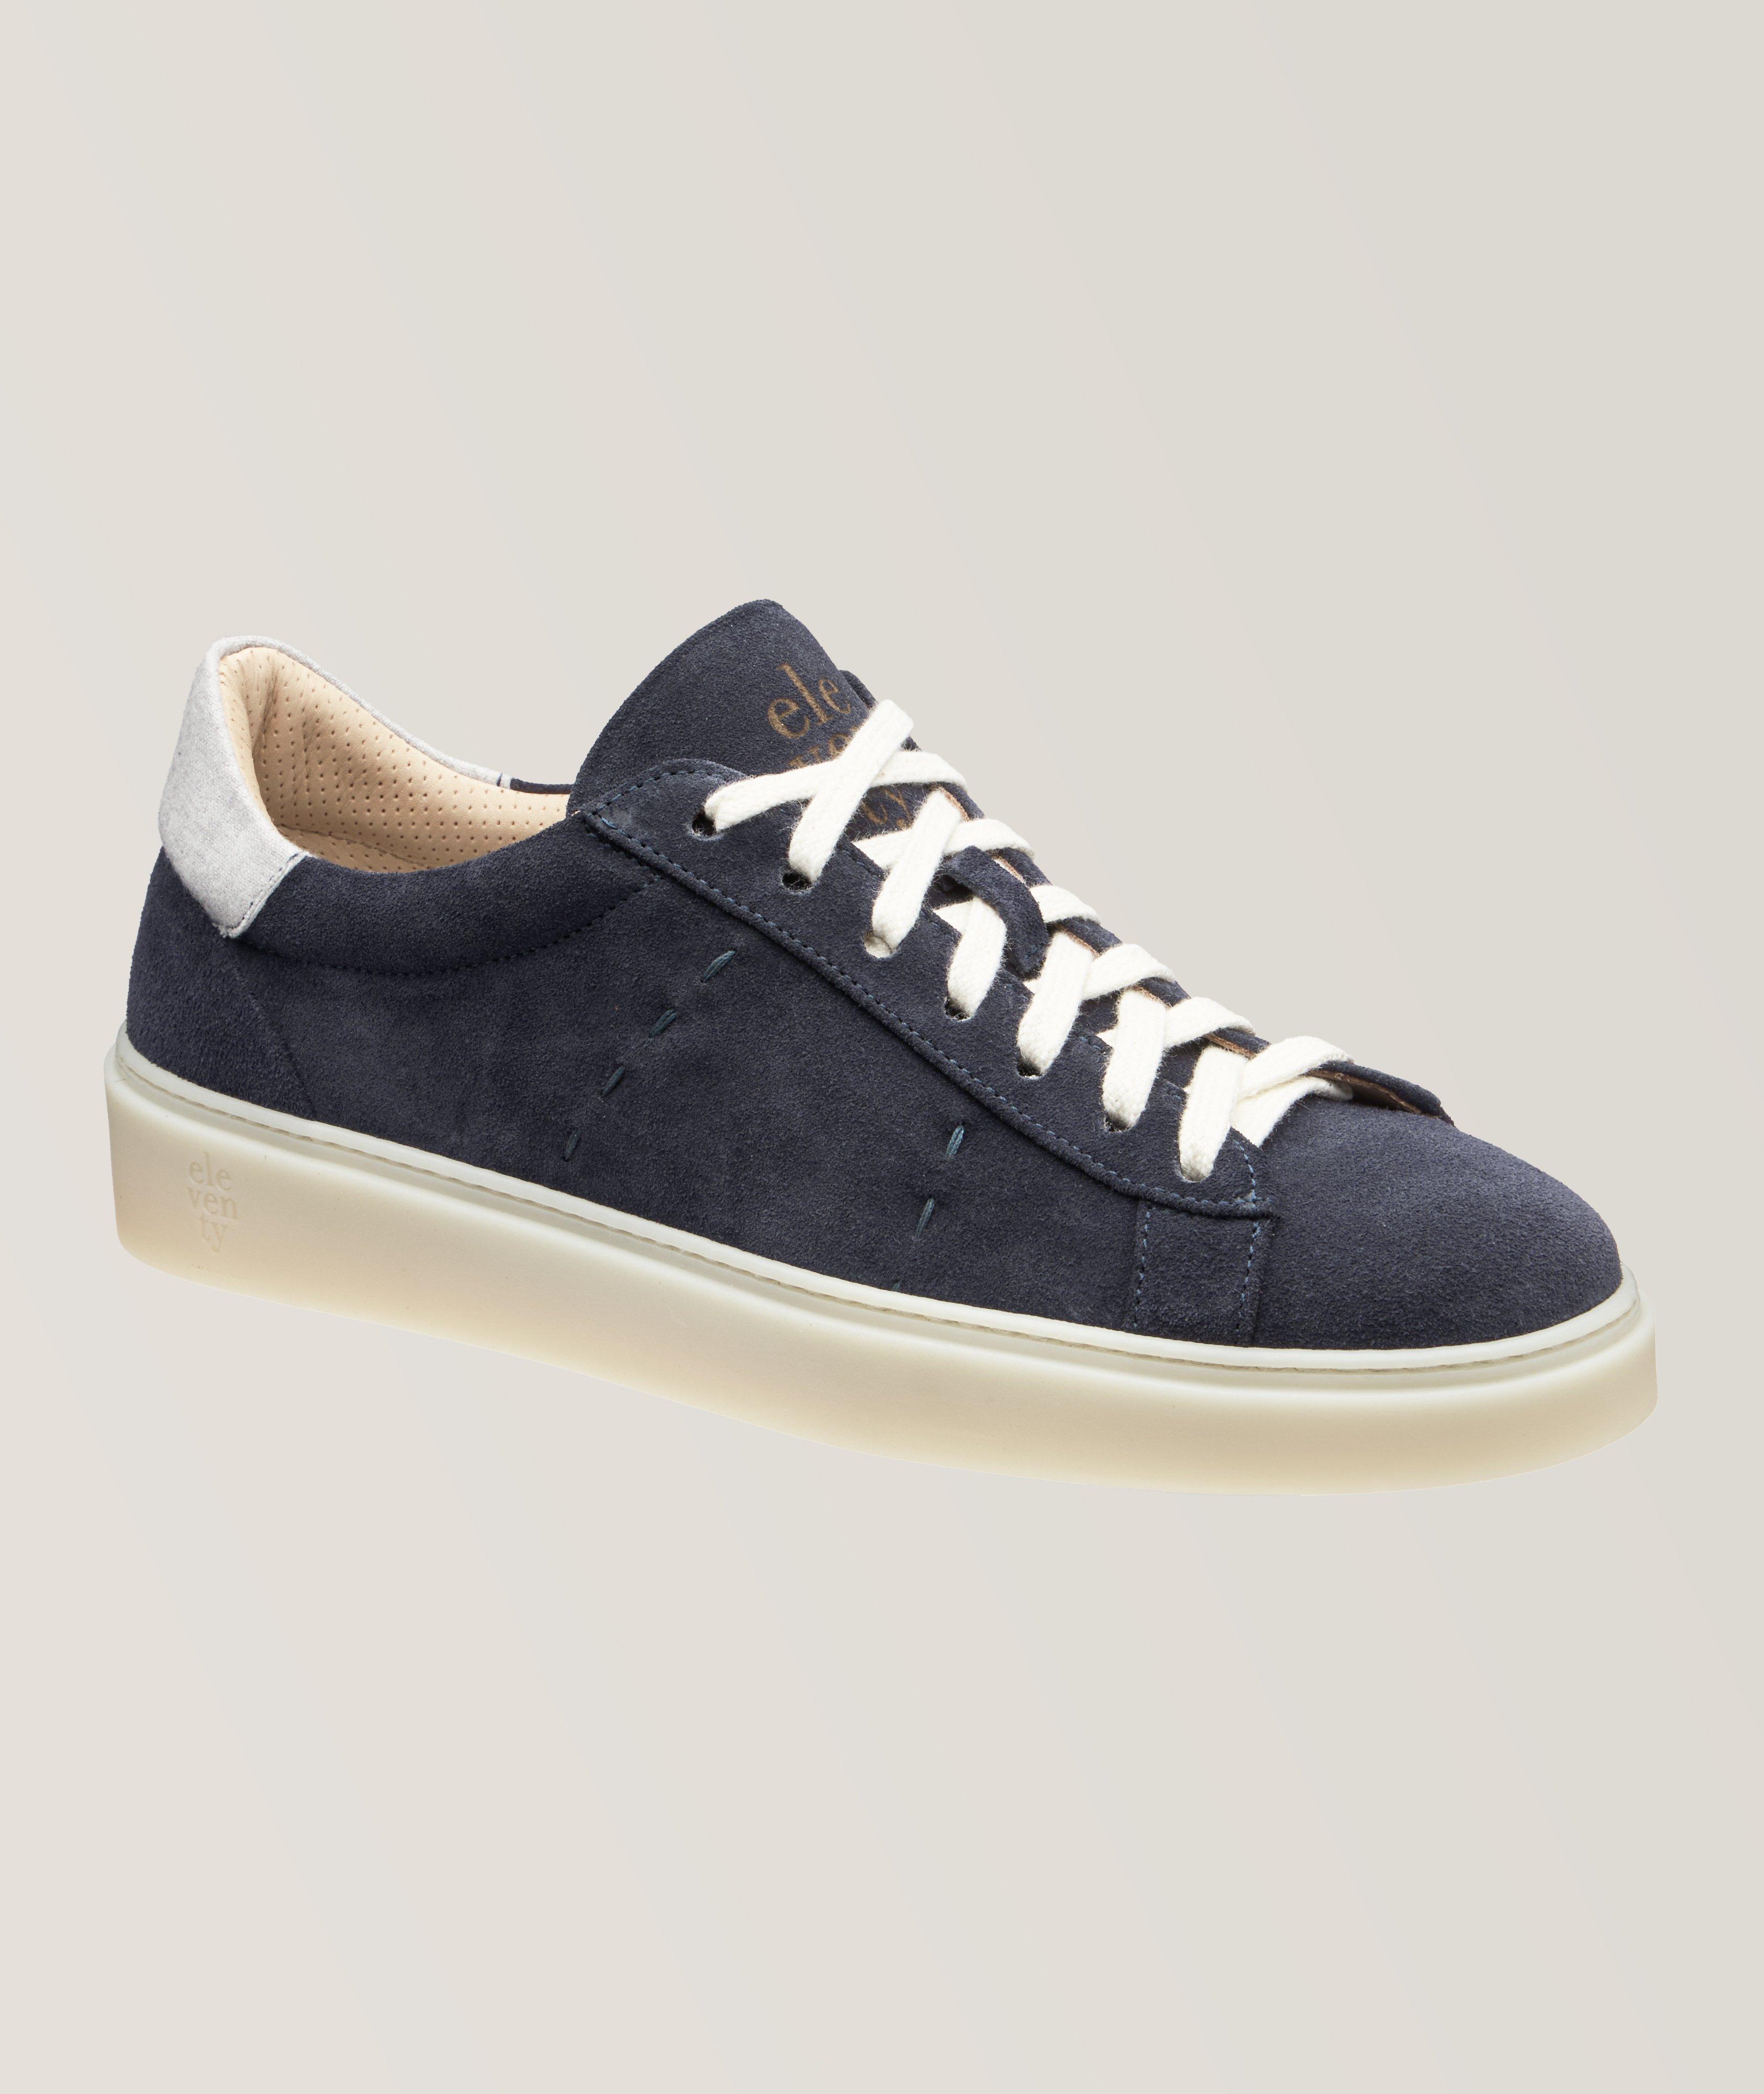 Pick Stitched Leather Sneakers image 0